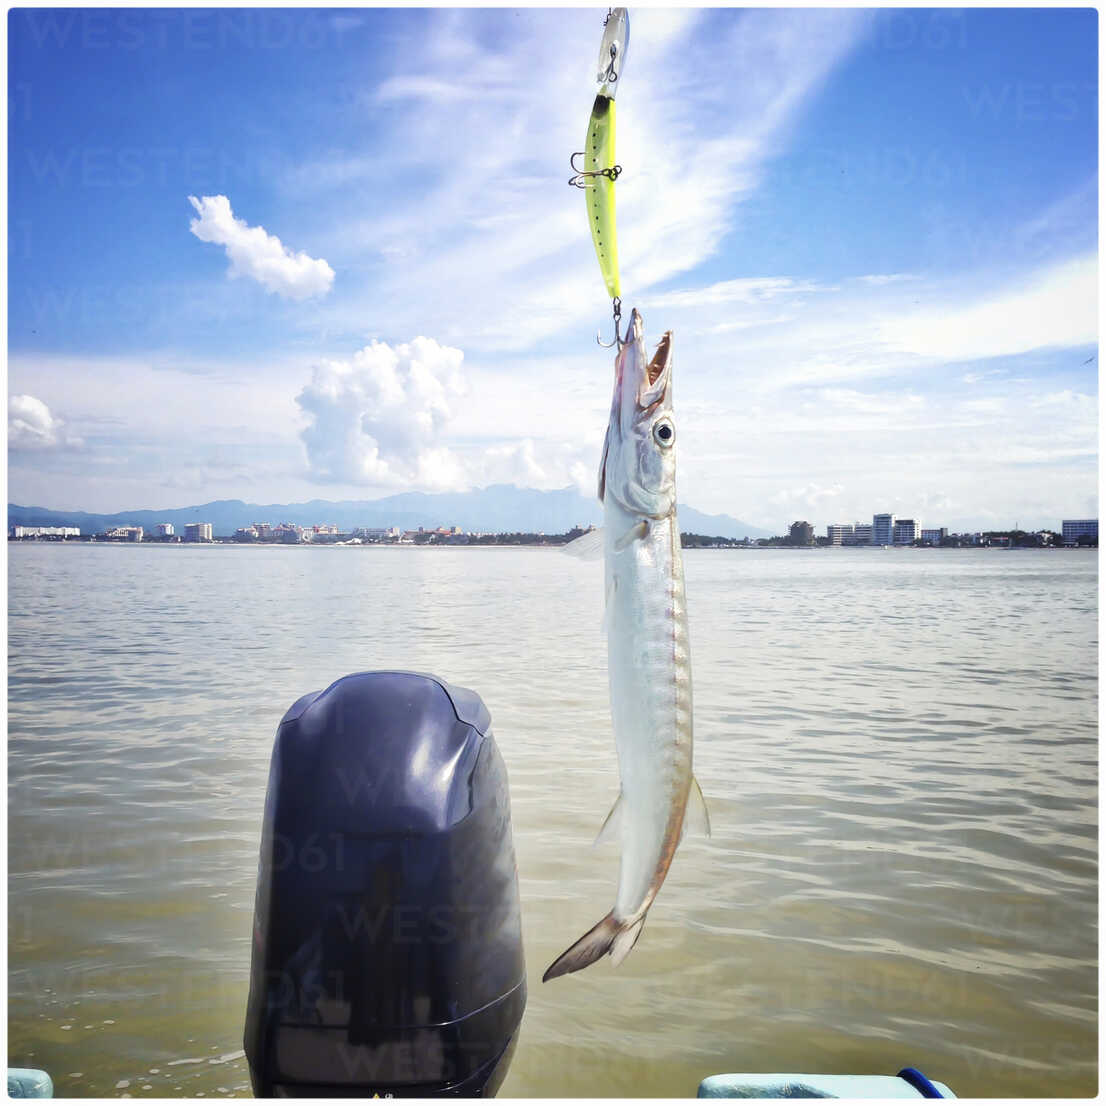 Barracuda caught with plastic wobbler lure from fishing boat. Coast line of  Nuevo Vallarta, Mexico in background. stock photo